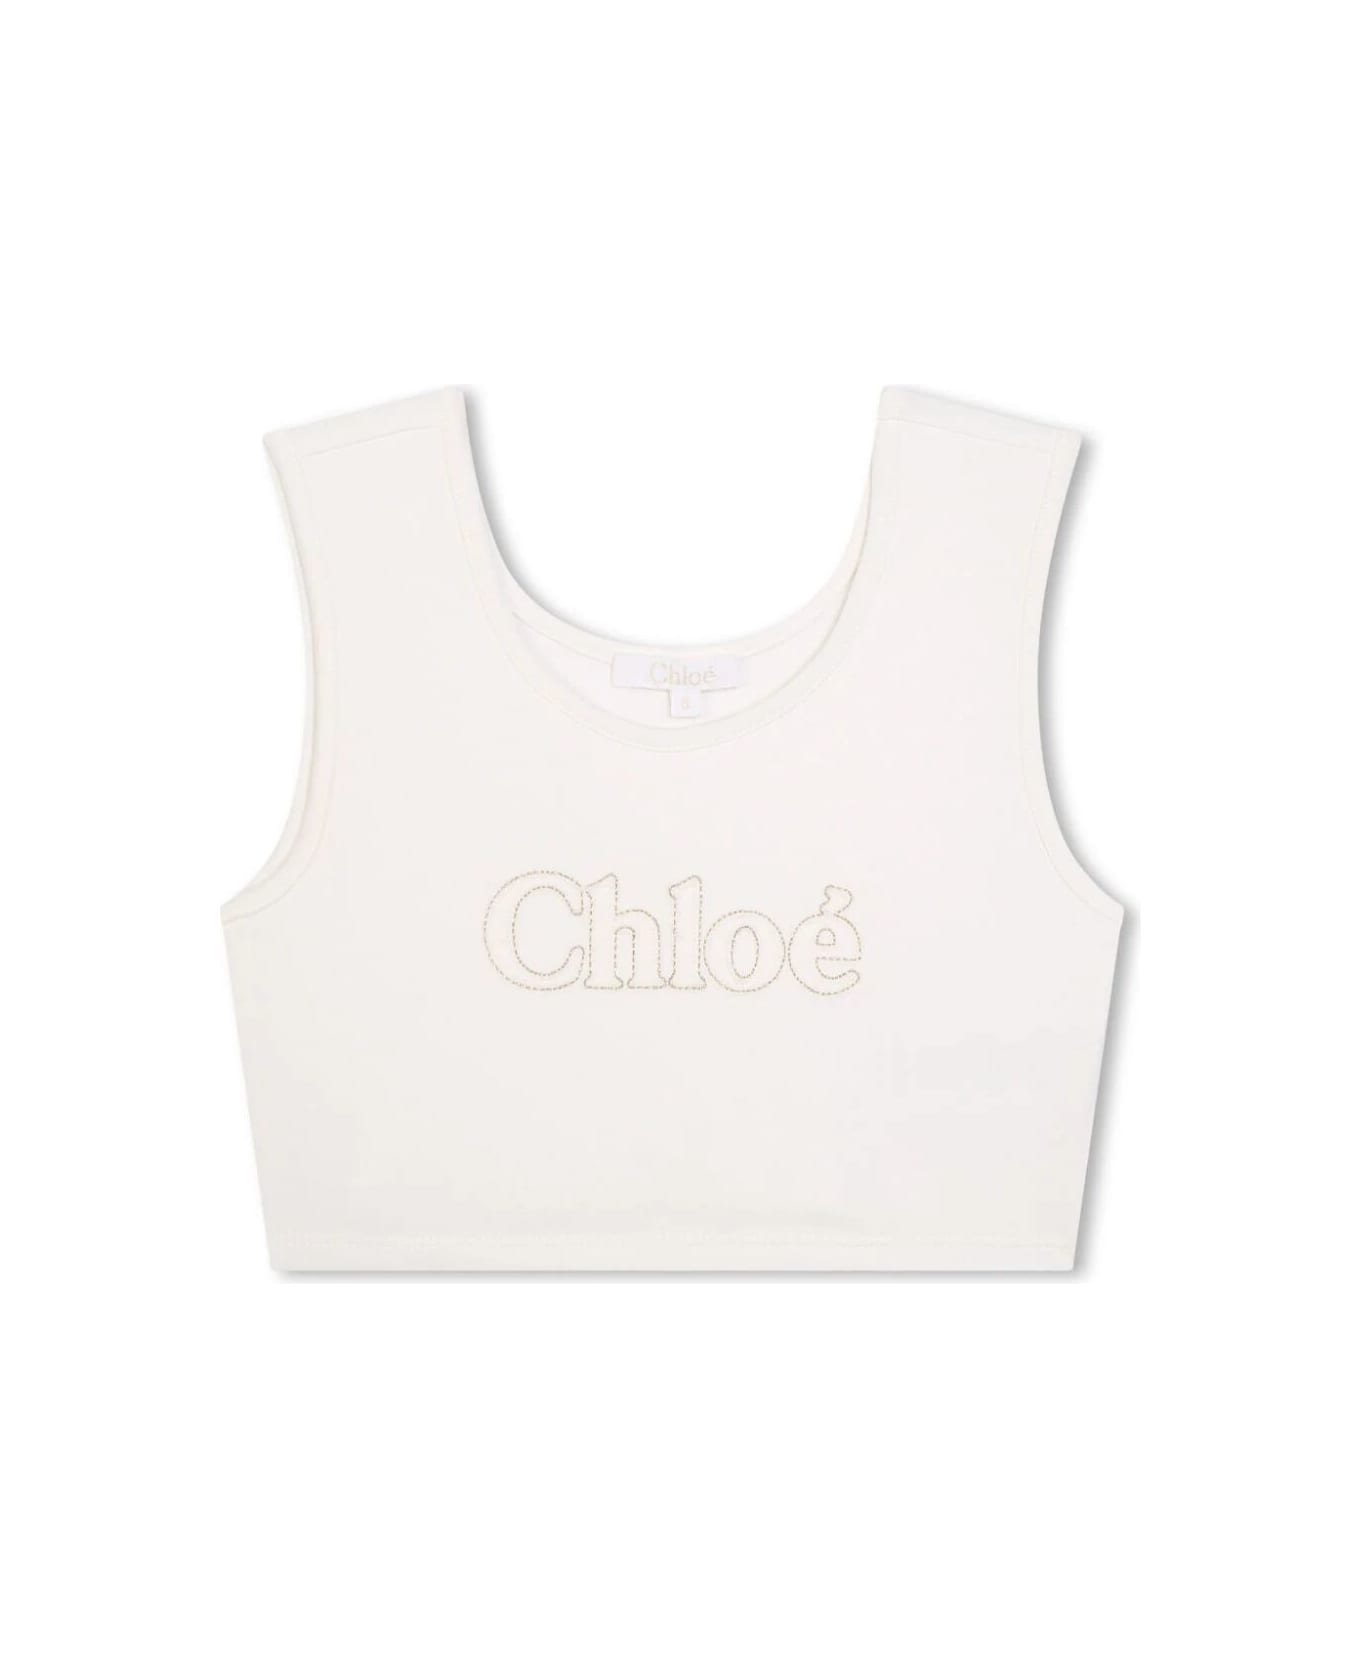 Chloé Tank Top - Off White トップス